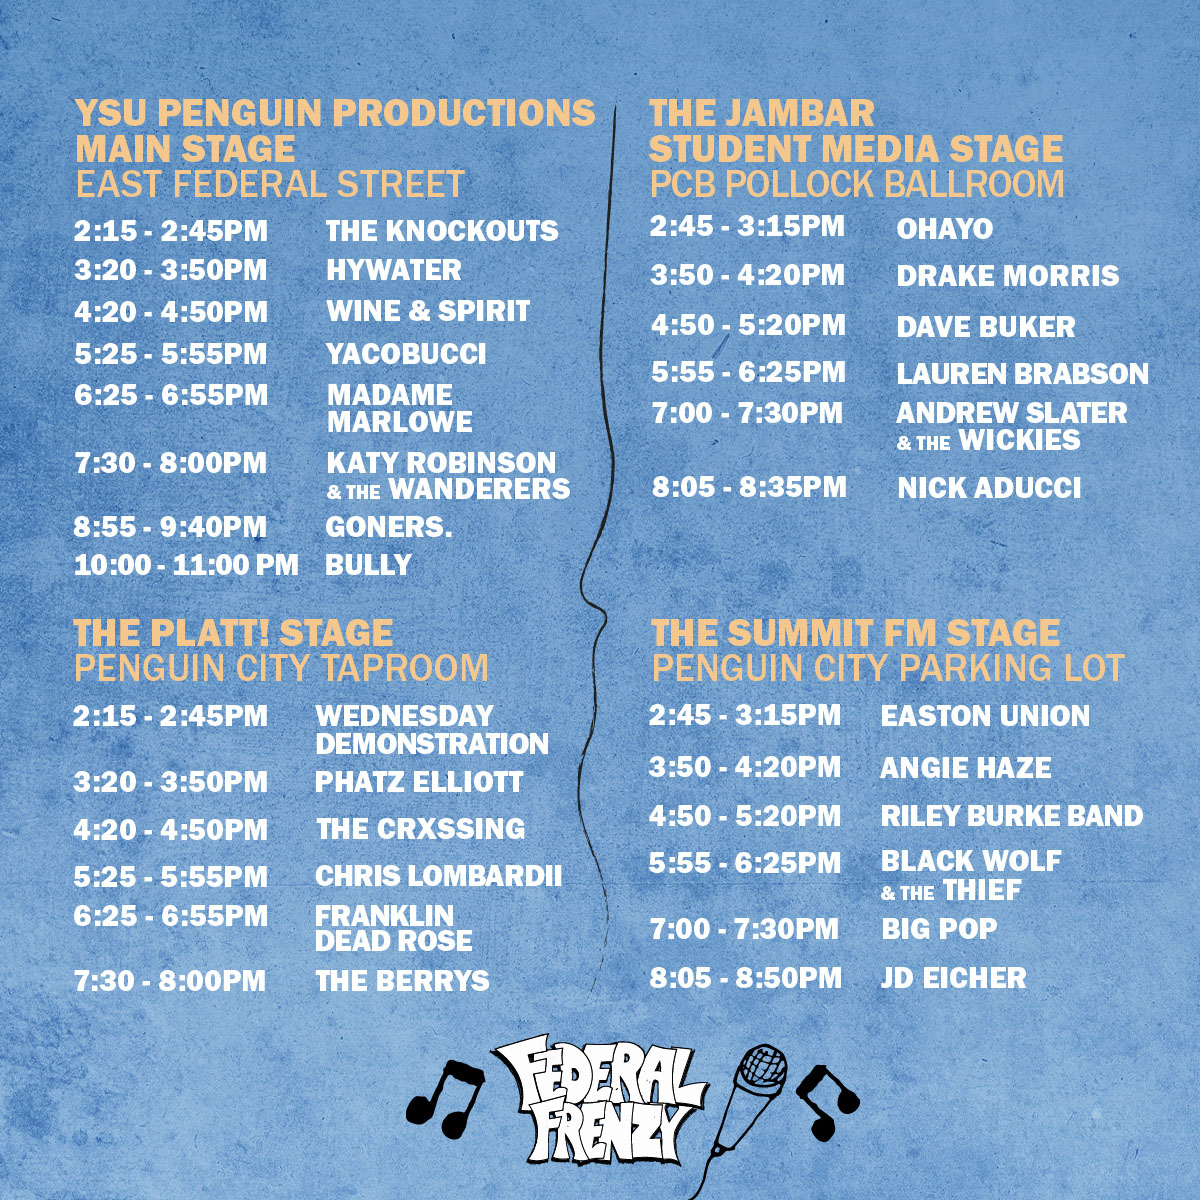 lineup of acts on four stages with times for each event